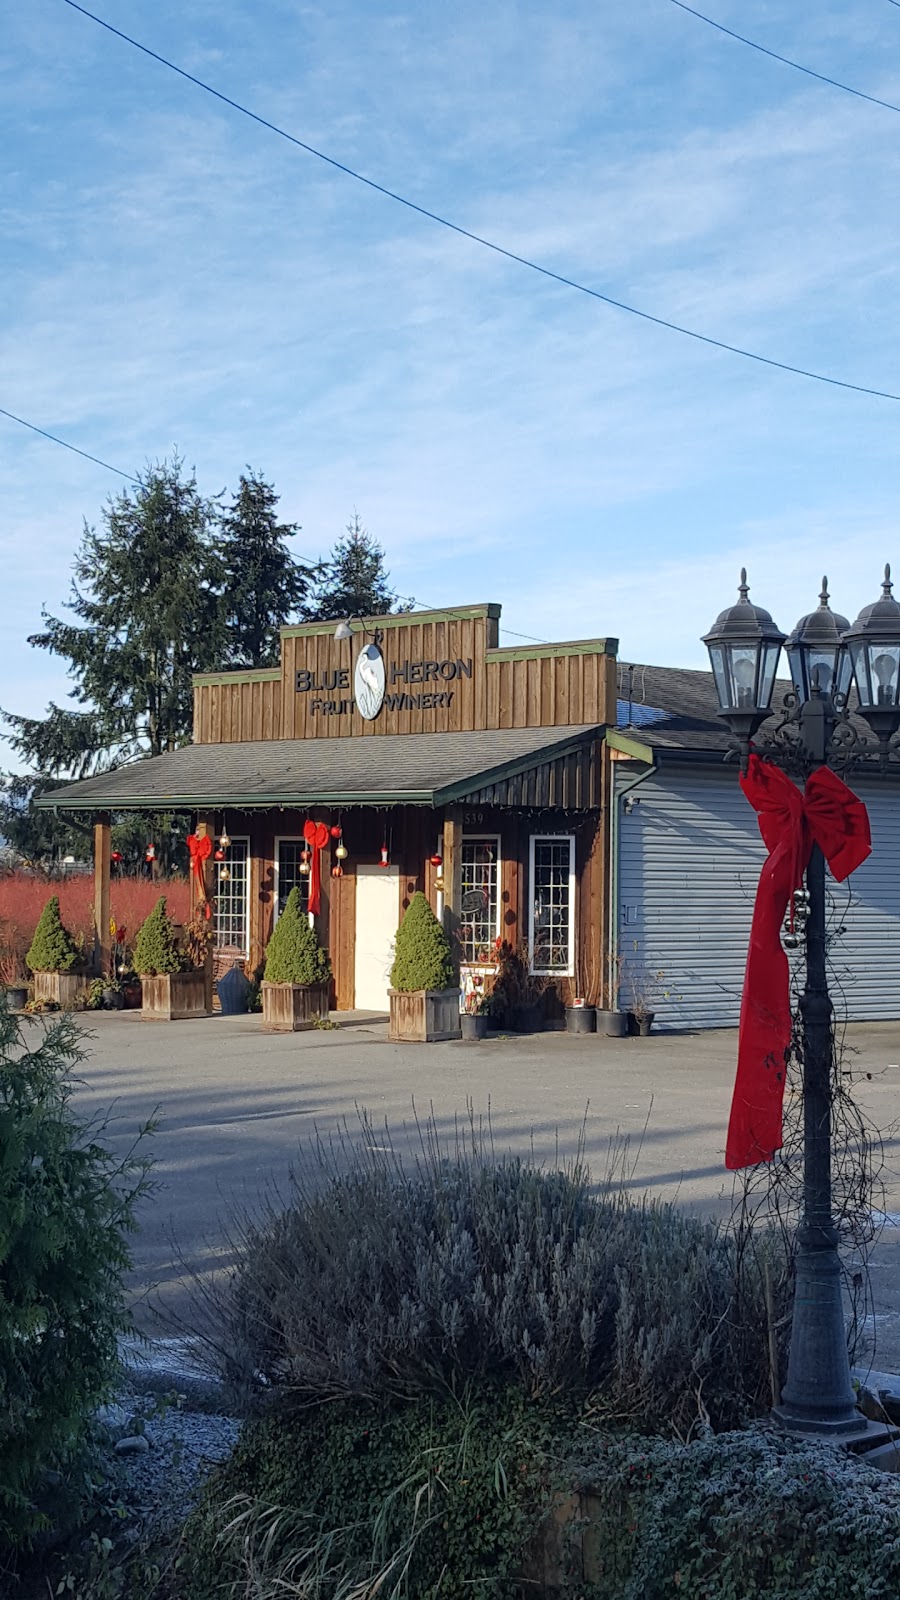 Blue Heron Winery | store | 18539 Old Dewdney Trunk Rd, Pitt Meadows, BC V3Y 2R9, Canada | 6044655563 OR +1 604-465-5563